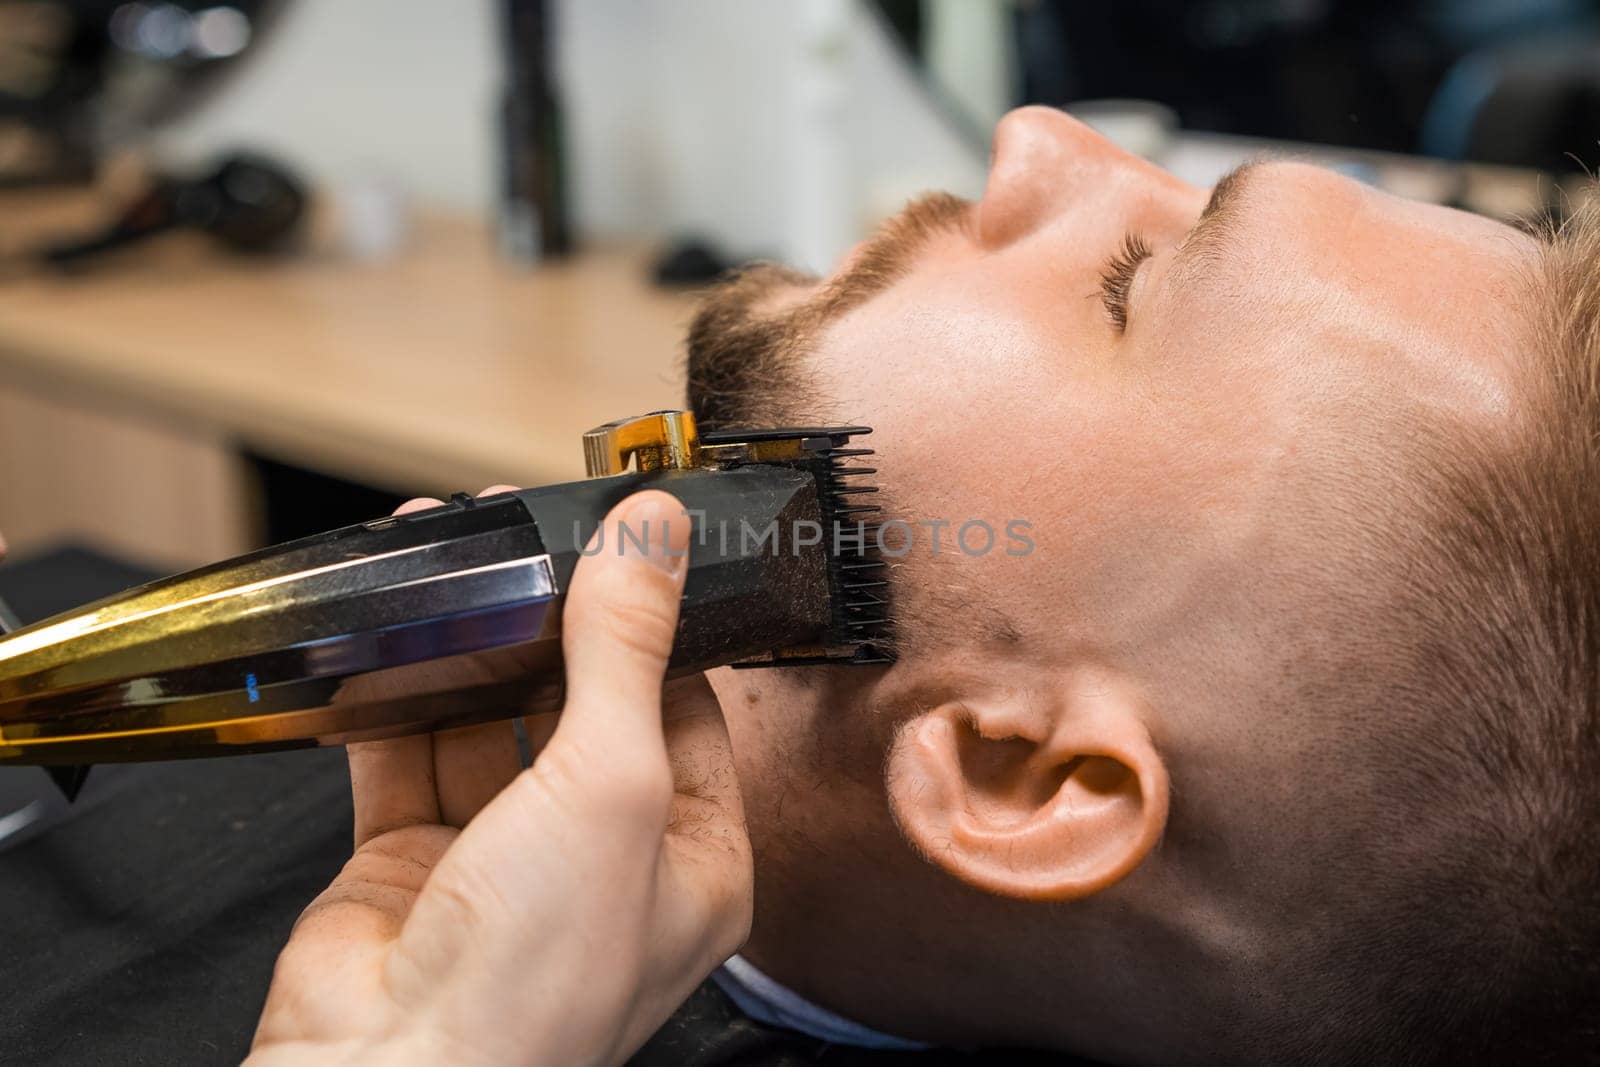 Barbers skilled hand deftly trims a clients beard using a precision trimmer in the barbershop